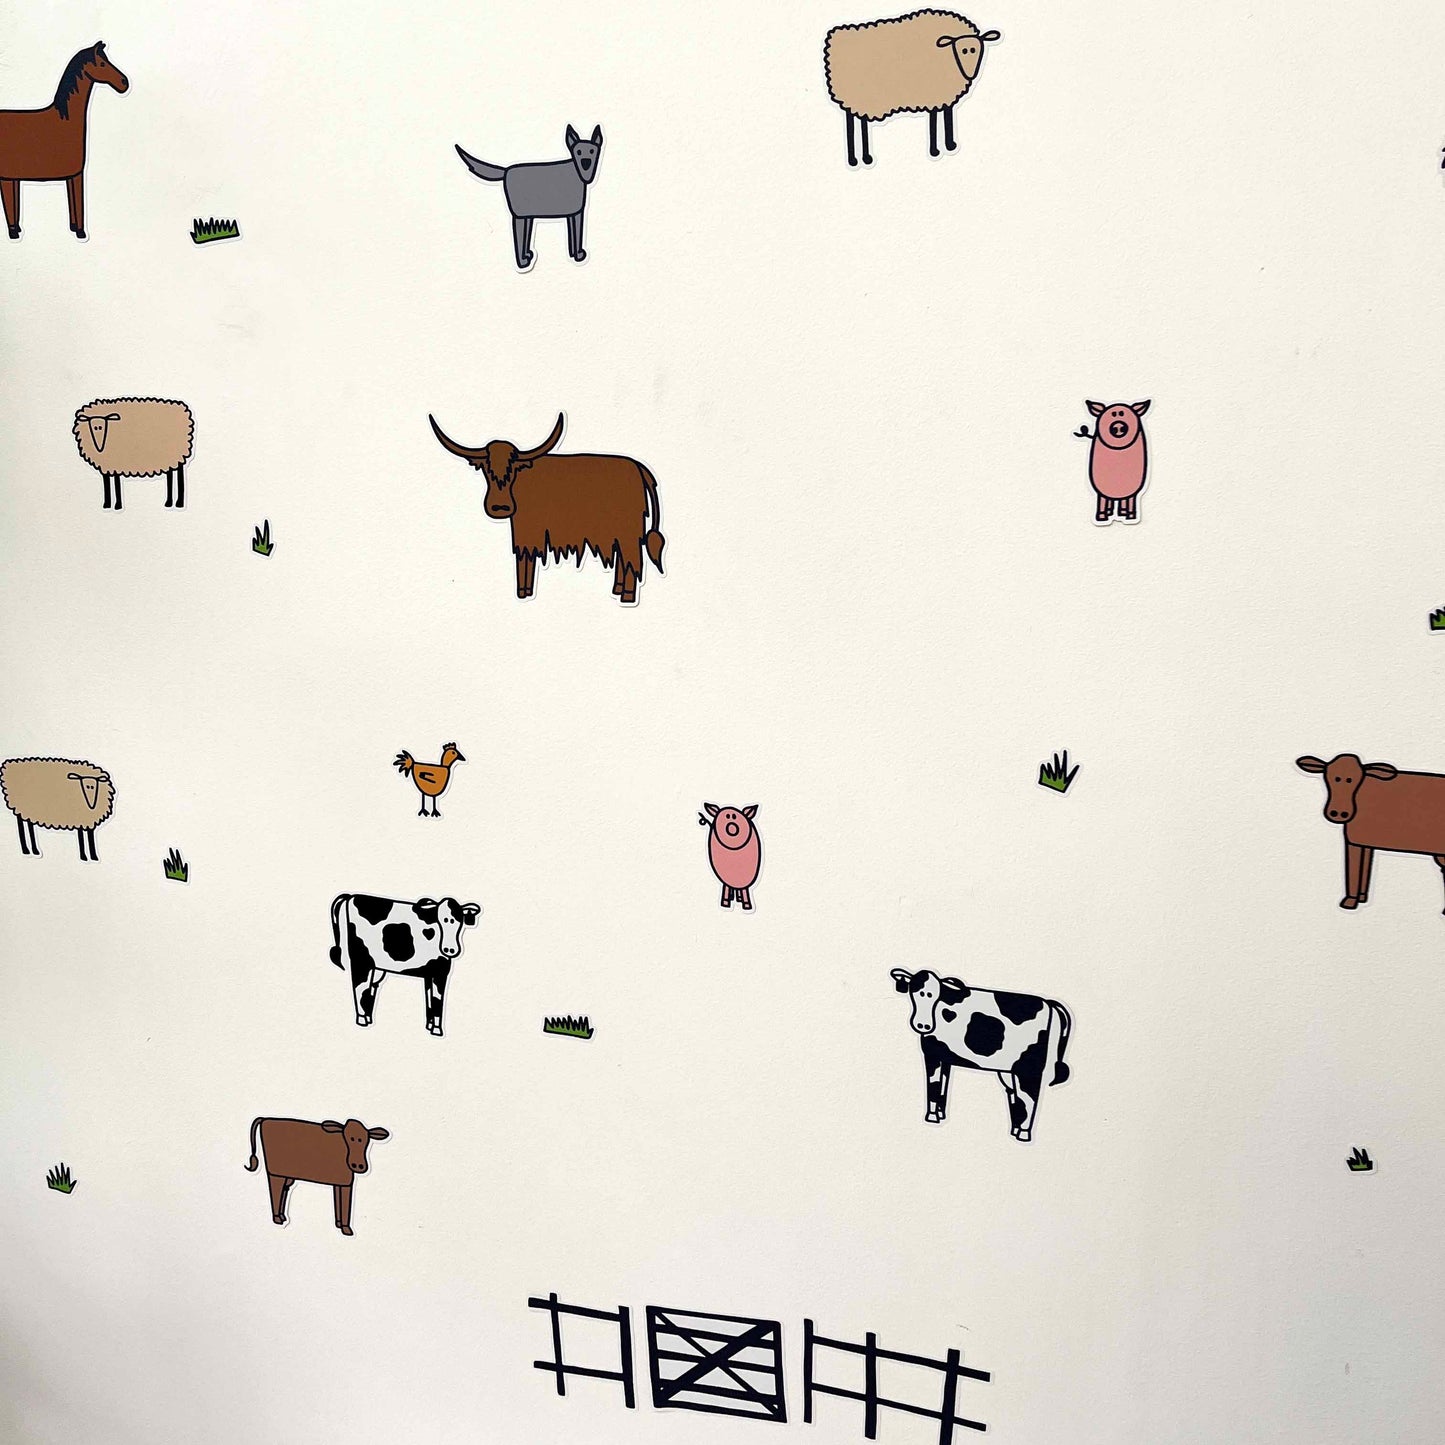 On the Farm Wall decals